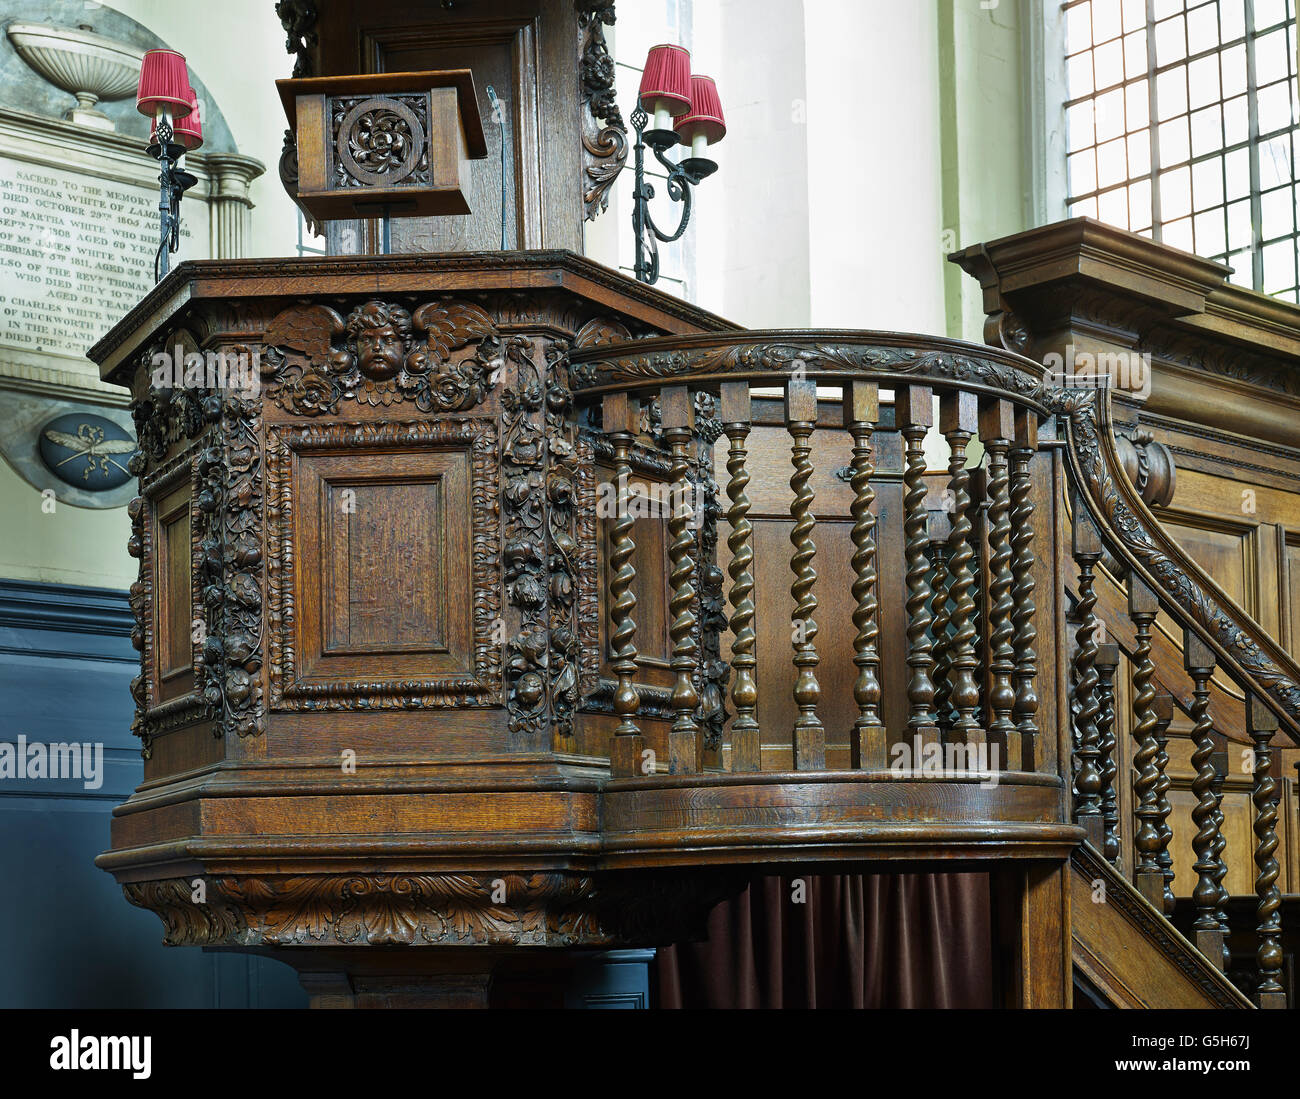 St James Garlickhythe, church in the City of London. The pulpit Stock Photo